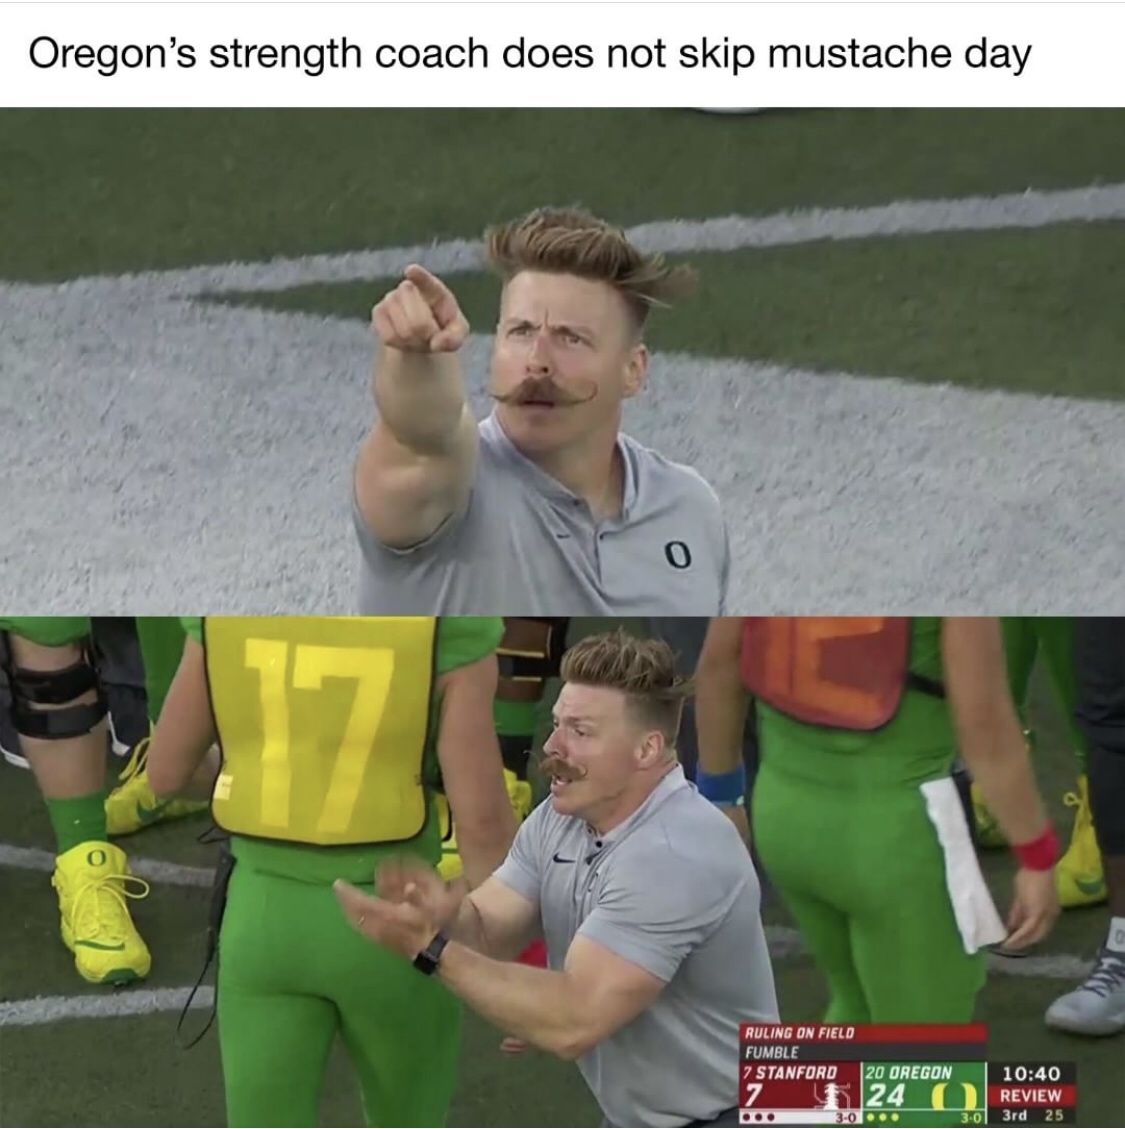 oregon strength coach meme - Oregon's strength coach does not skip mustache day Ruling On Field Fumble 7 Stanford 2 20 Oregon 24 O Review 3.01 3rd 25 30